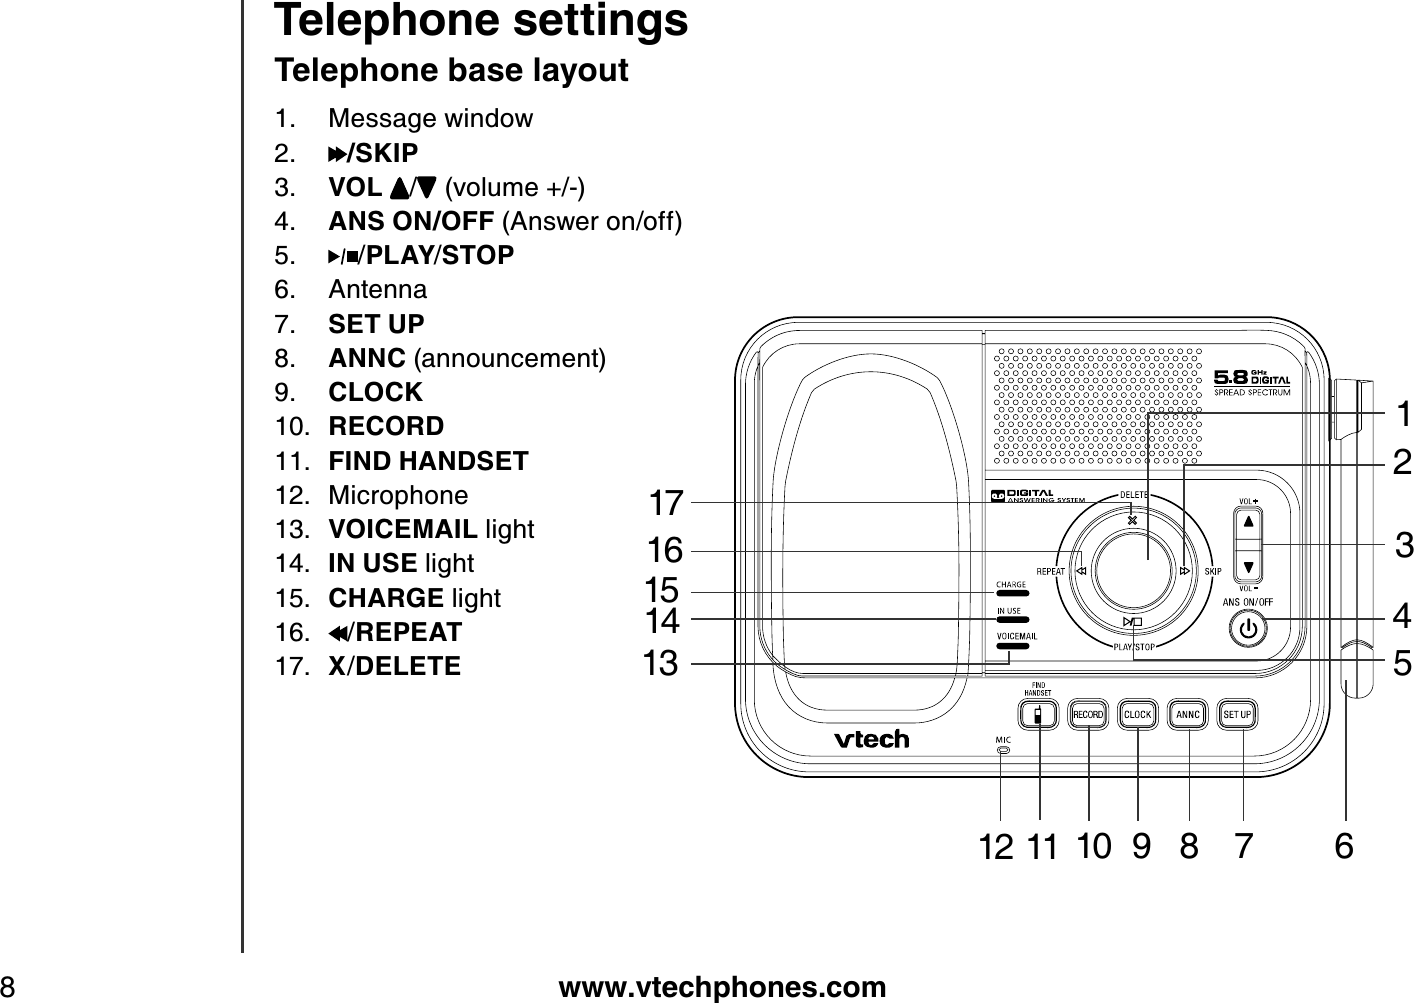 www.vtechphones.com8Telephone settingsTelephone base layout Message window/SKIPVOL /  (volume + /-) ANS ON/OFF (Answer on/off)/PLAY/STOP AntennaSET UP ANNC (announcement) CLOCK RECORDFIND HANDSET MicrophoneVOICEMAIL light IN USE light CHARGE light/REPEATX/DELETE1.2.3.4.5.6.7.8.9.10.11.12.13.14.15.16.17.2116175151413311 10 9 812 746